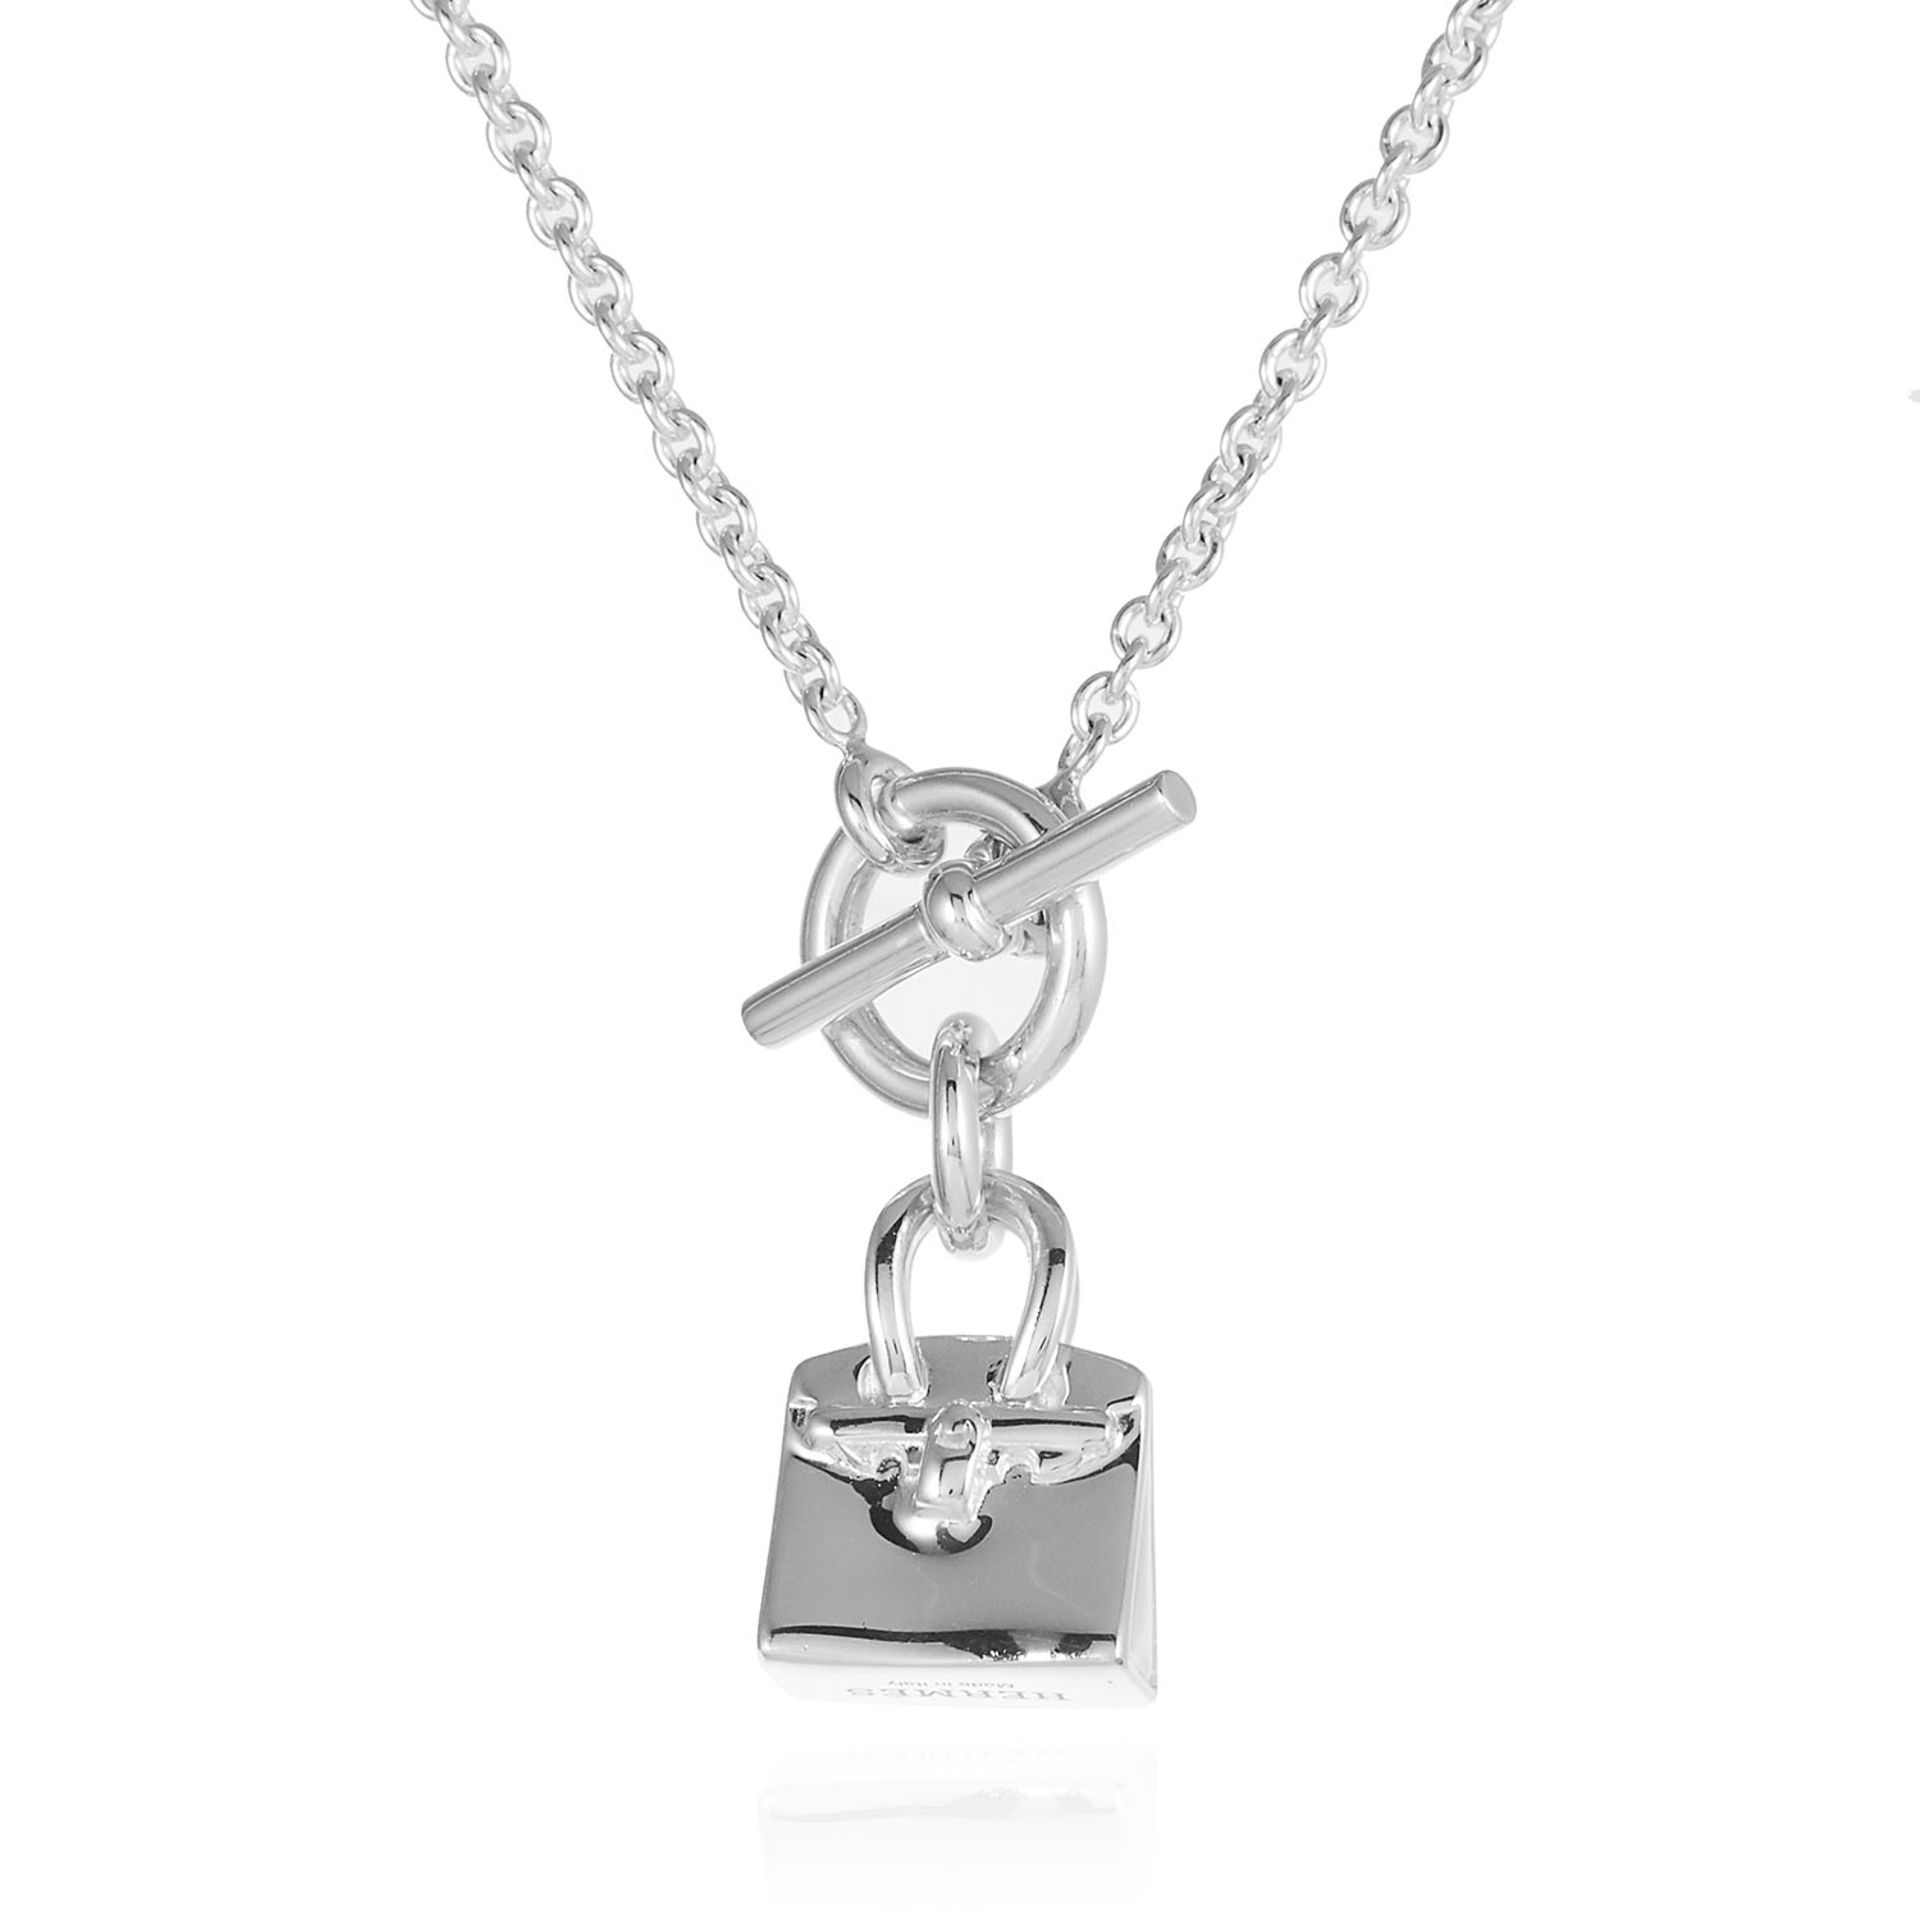 A KELLY BAG AMULETTE PENDANT AND CHAIN, HERMES in sterling silver, designed as chain suspending a